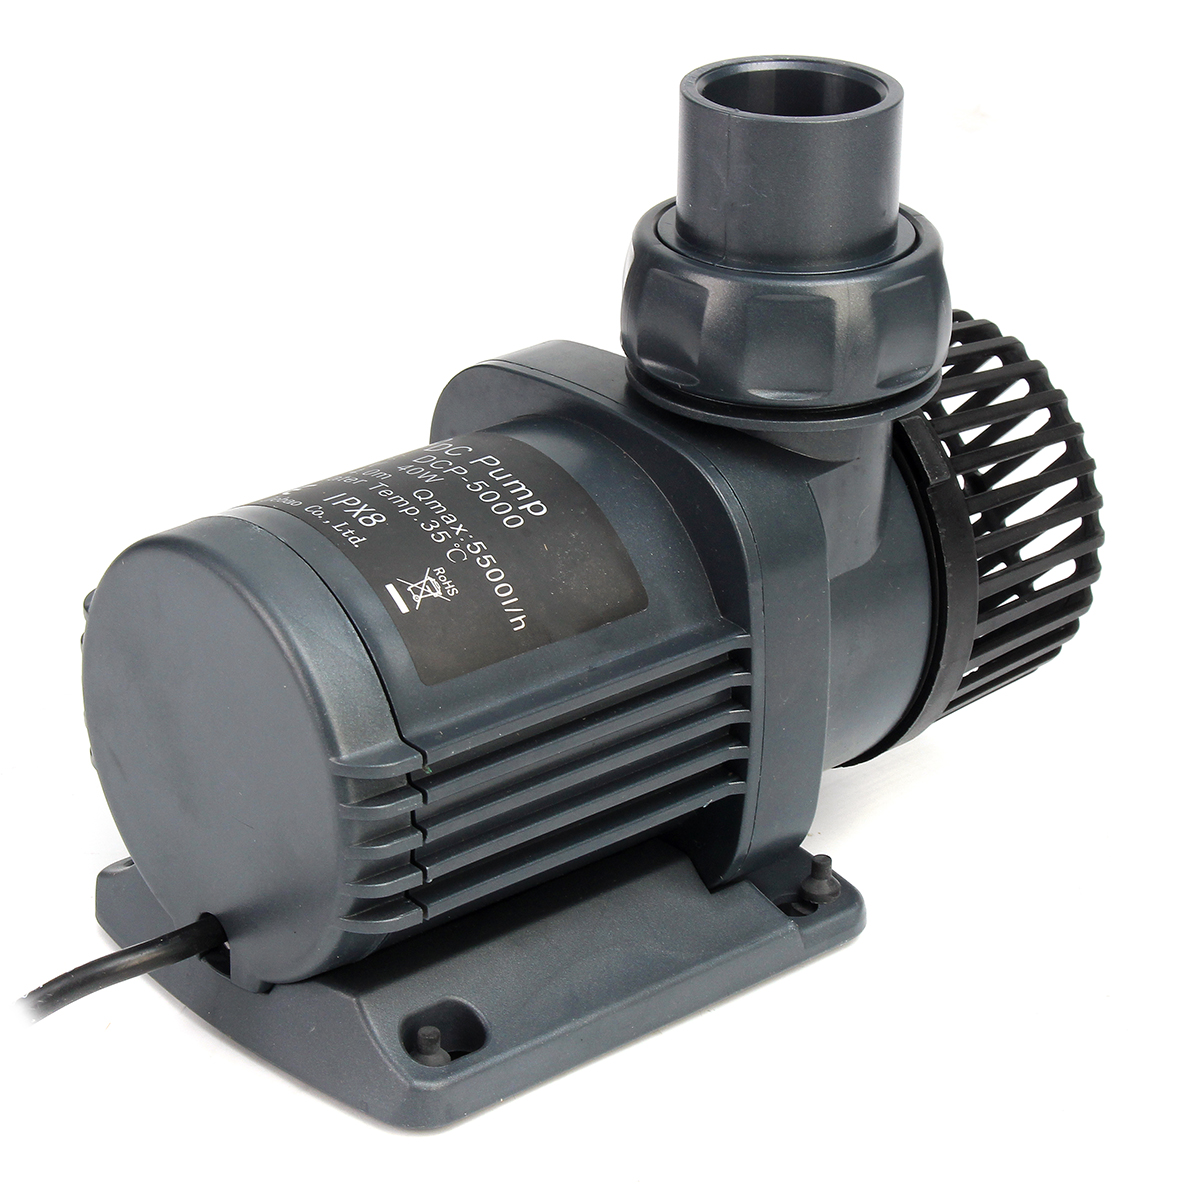 Jebao-Jecod-DCP-Series-3000-20000-Maring-DC-Sine-Wave-Return-Pump-with-Controller-1269253-7